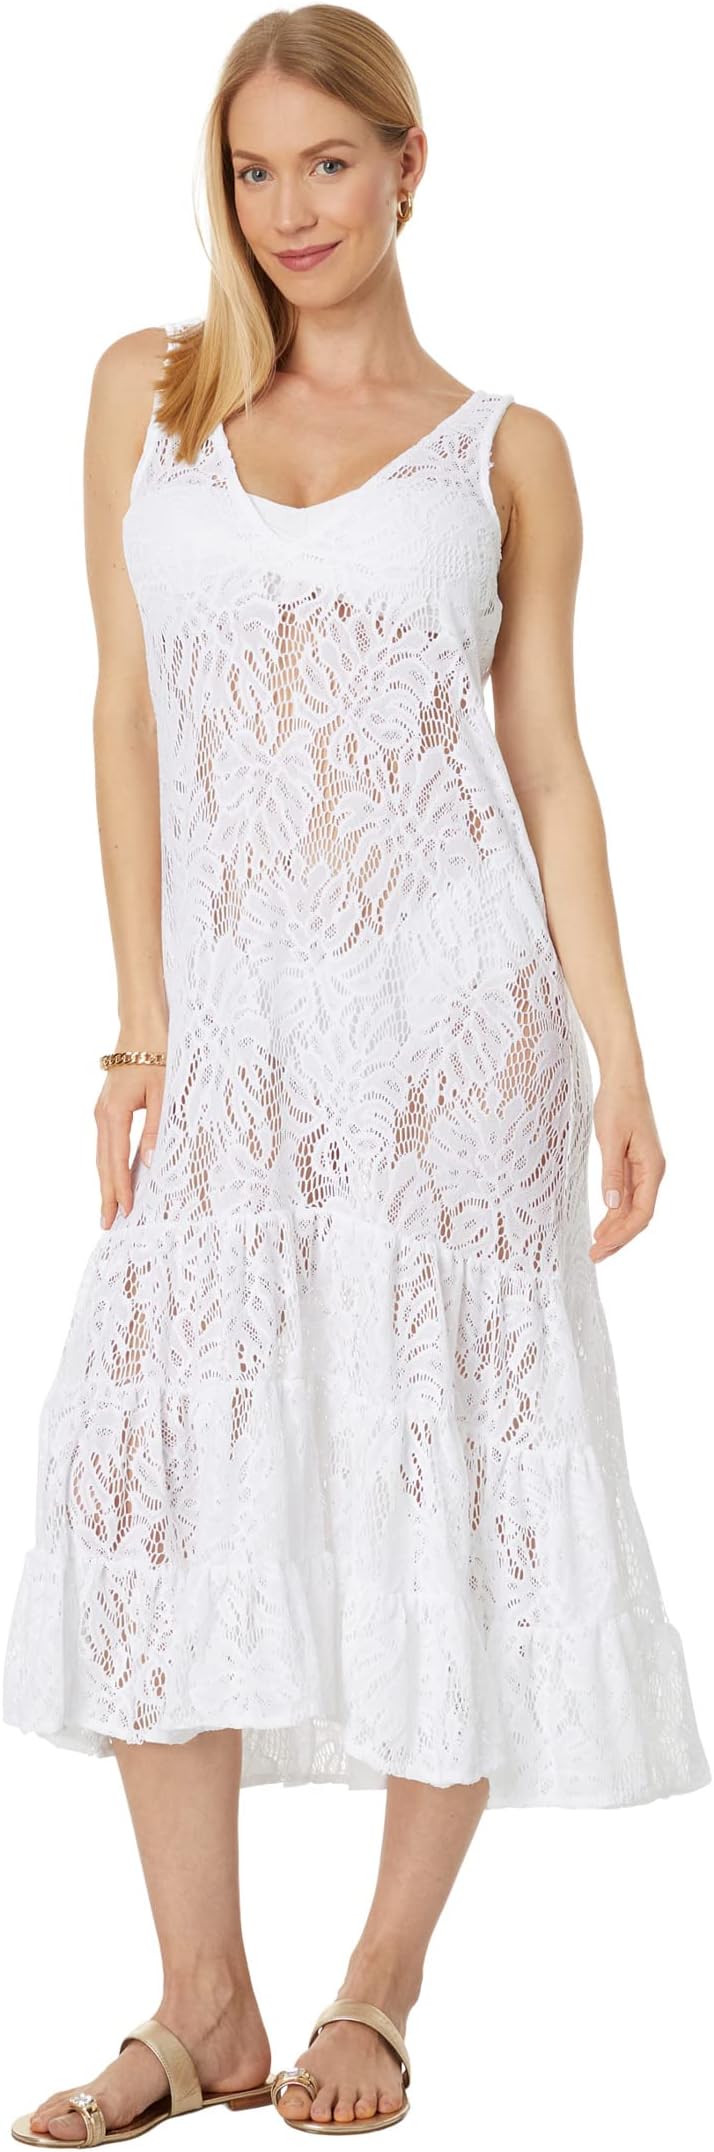 paradise beach resort Накидка Finnley Lace Cover-Up Lilly Pulitzer, цвет Resort White Paradise Found Lace